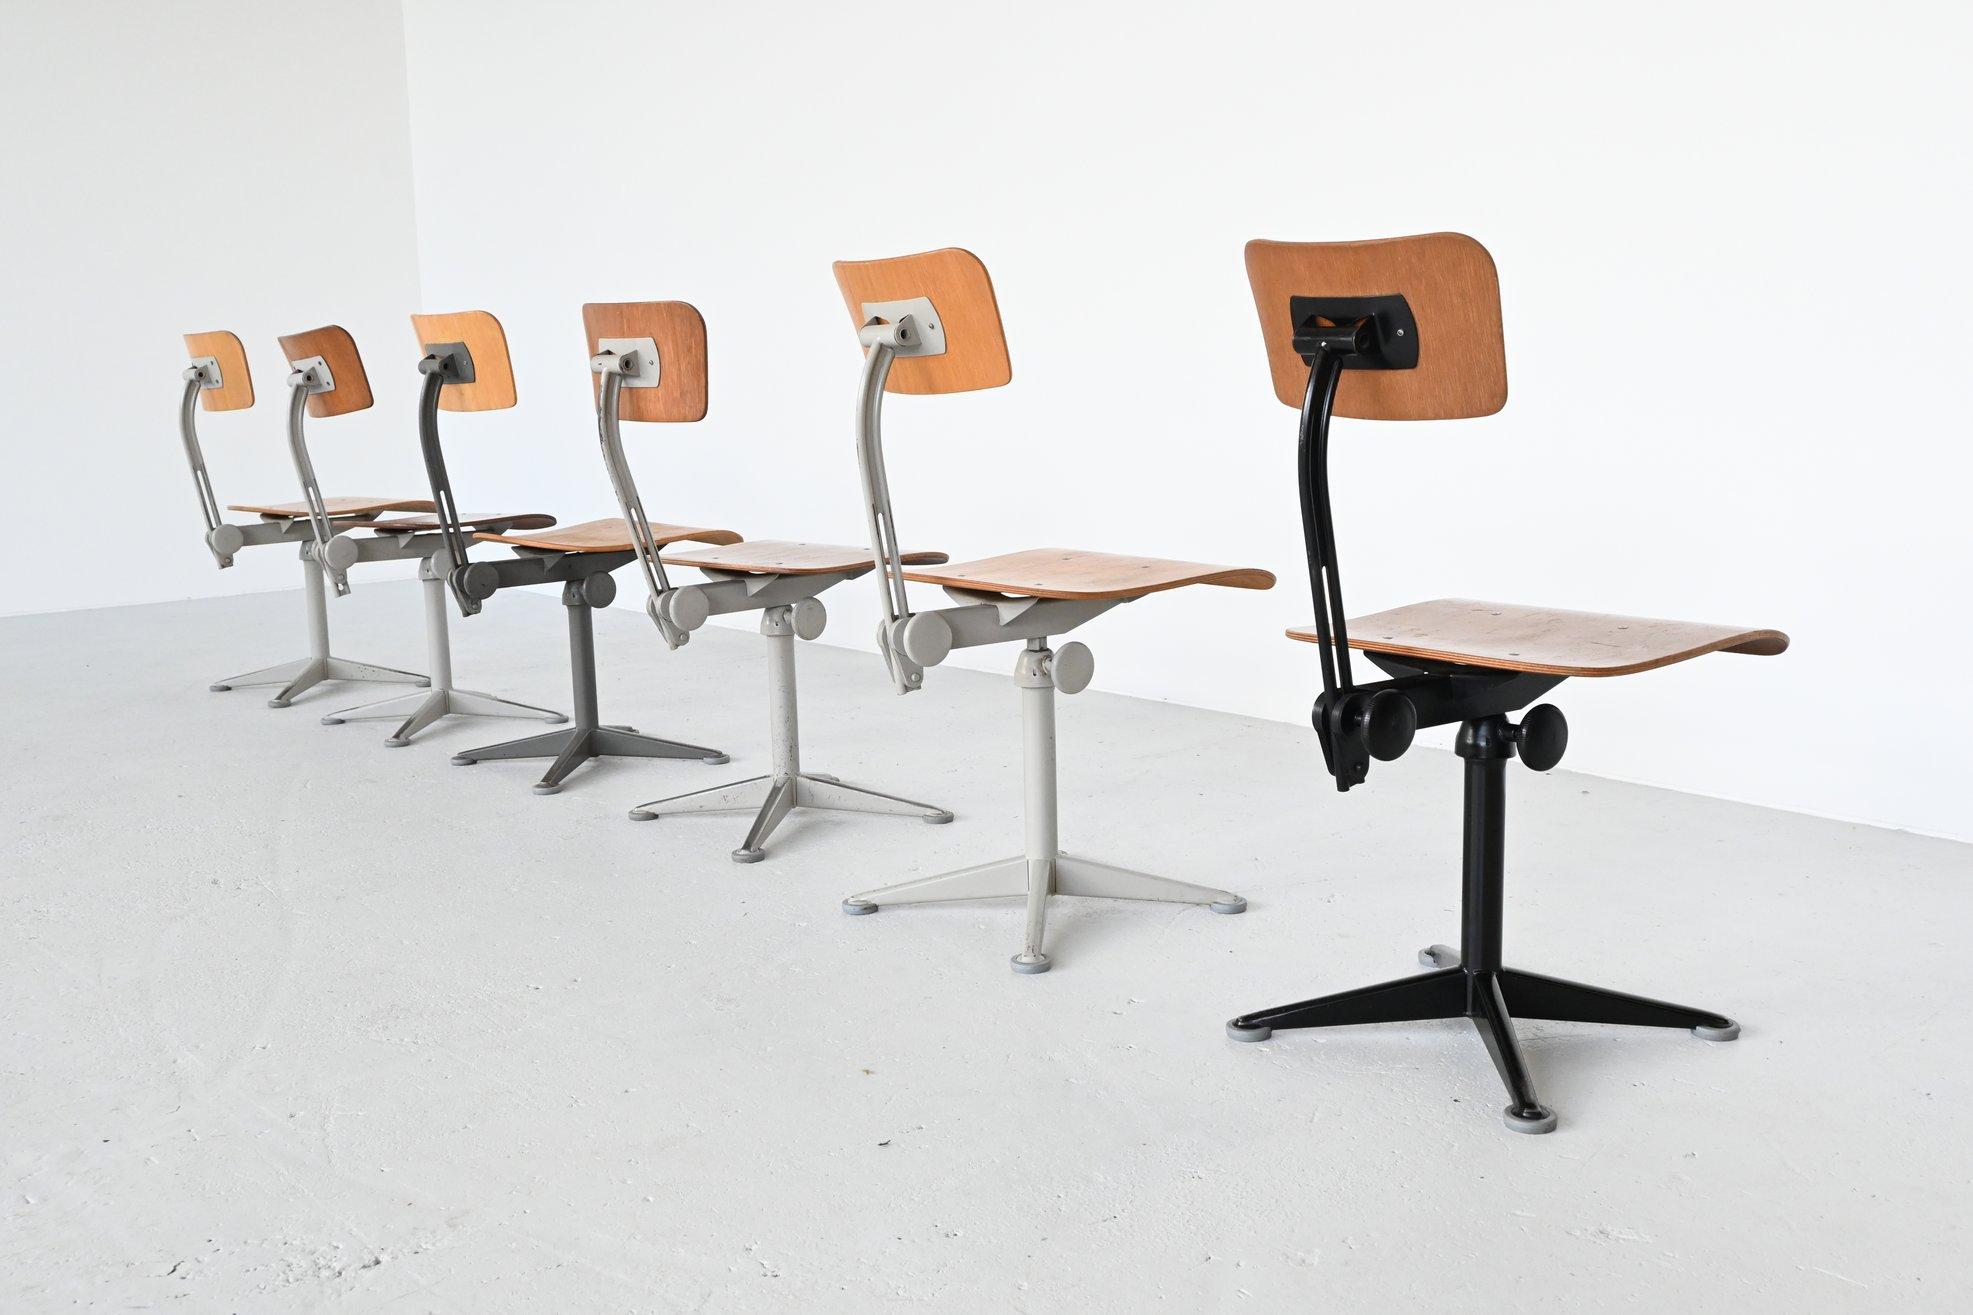 Very nice industrial drafting chairs designed by Friso Kramer and manufactured by Ahrend de Cirkel, the Netherlands, 1960. We have several models of these drafting chairs in stock. All of them have a lacquered metal frame with a plywood seat and